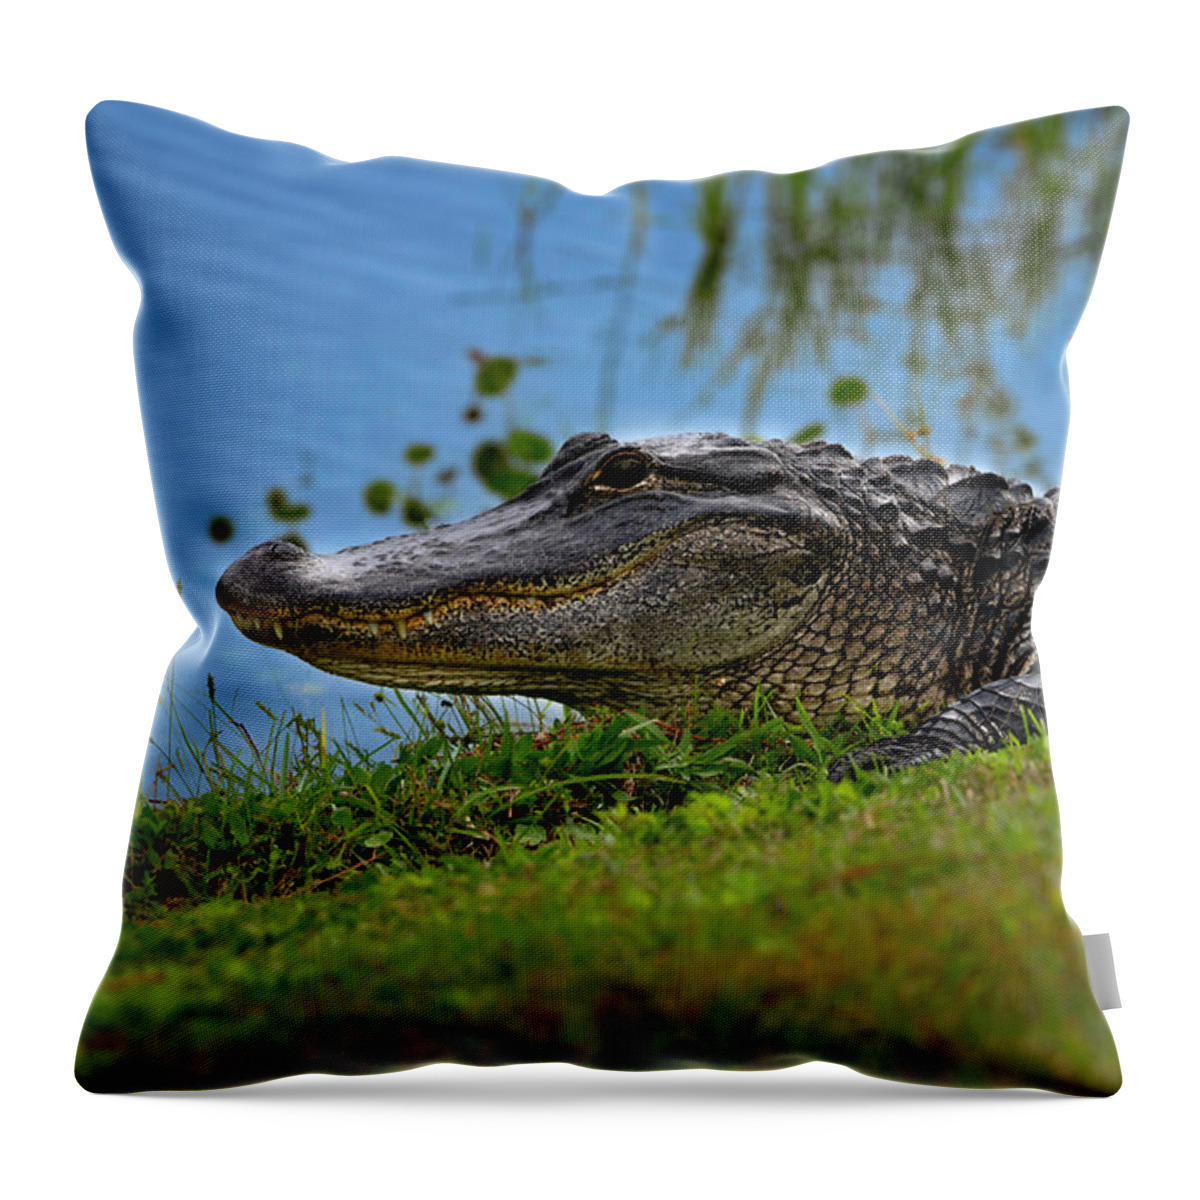 Aligator Throw Pillow featuring the photograph Florida Gator 3 by Larry Marshall